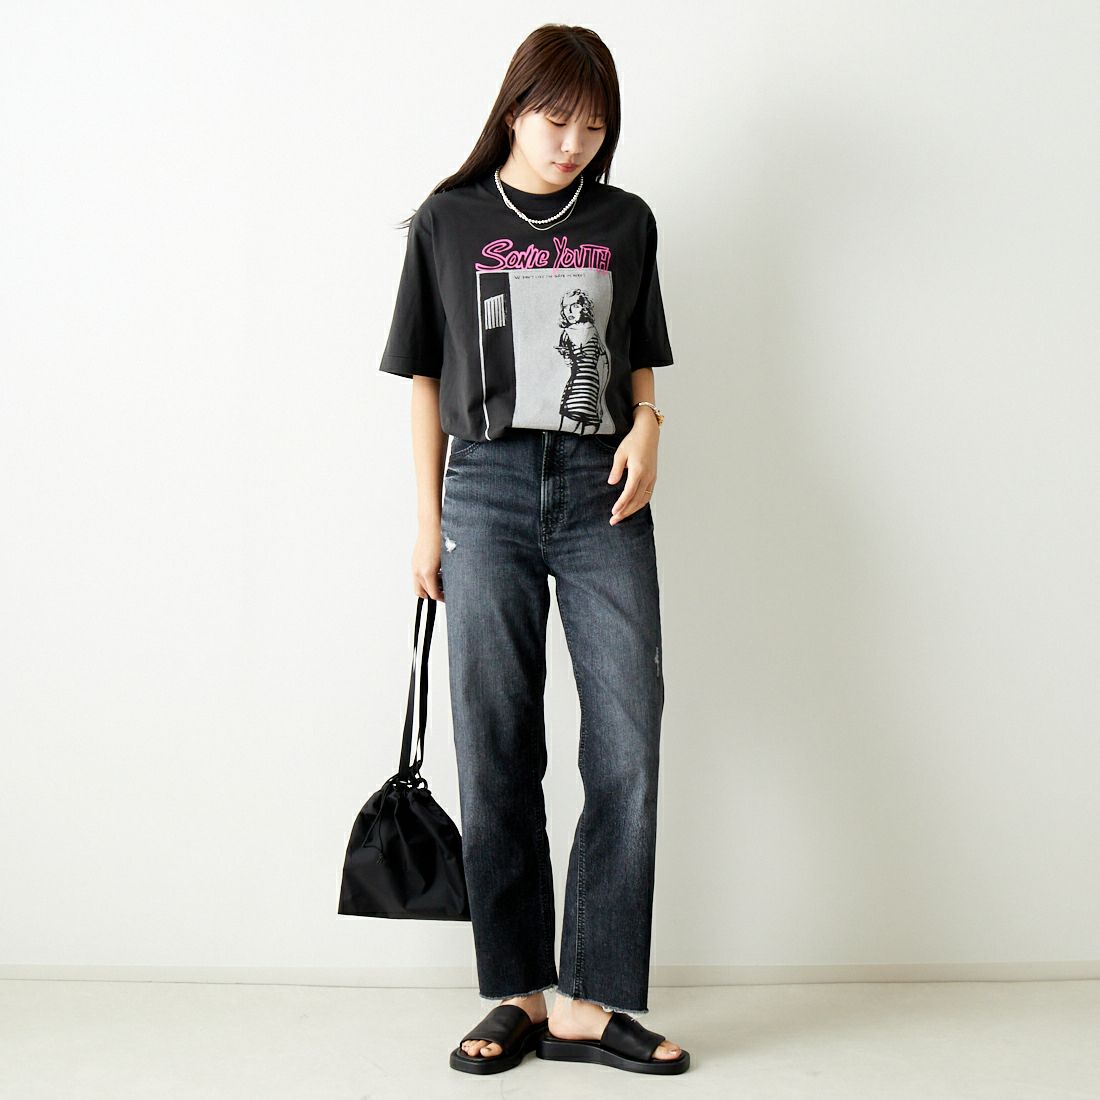 blurhms ROOTSTOCK [ブラームス ルーツストック] We dont like スタンダードプリントTシャツ [BROOTS24S33SONIC6] 02 INK BLK &&モデル身長：167cm 着用サイズ：0&&